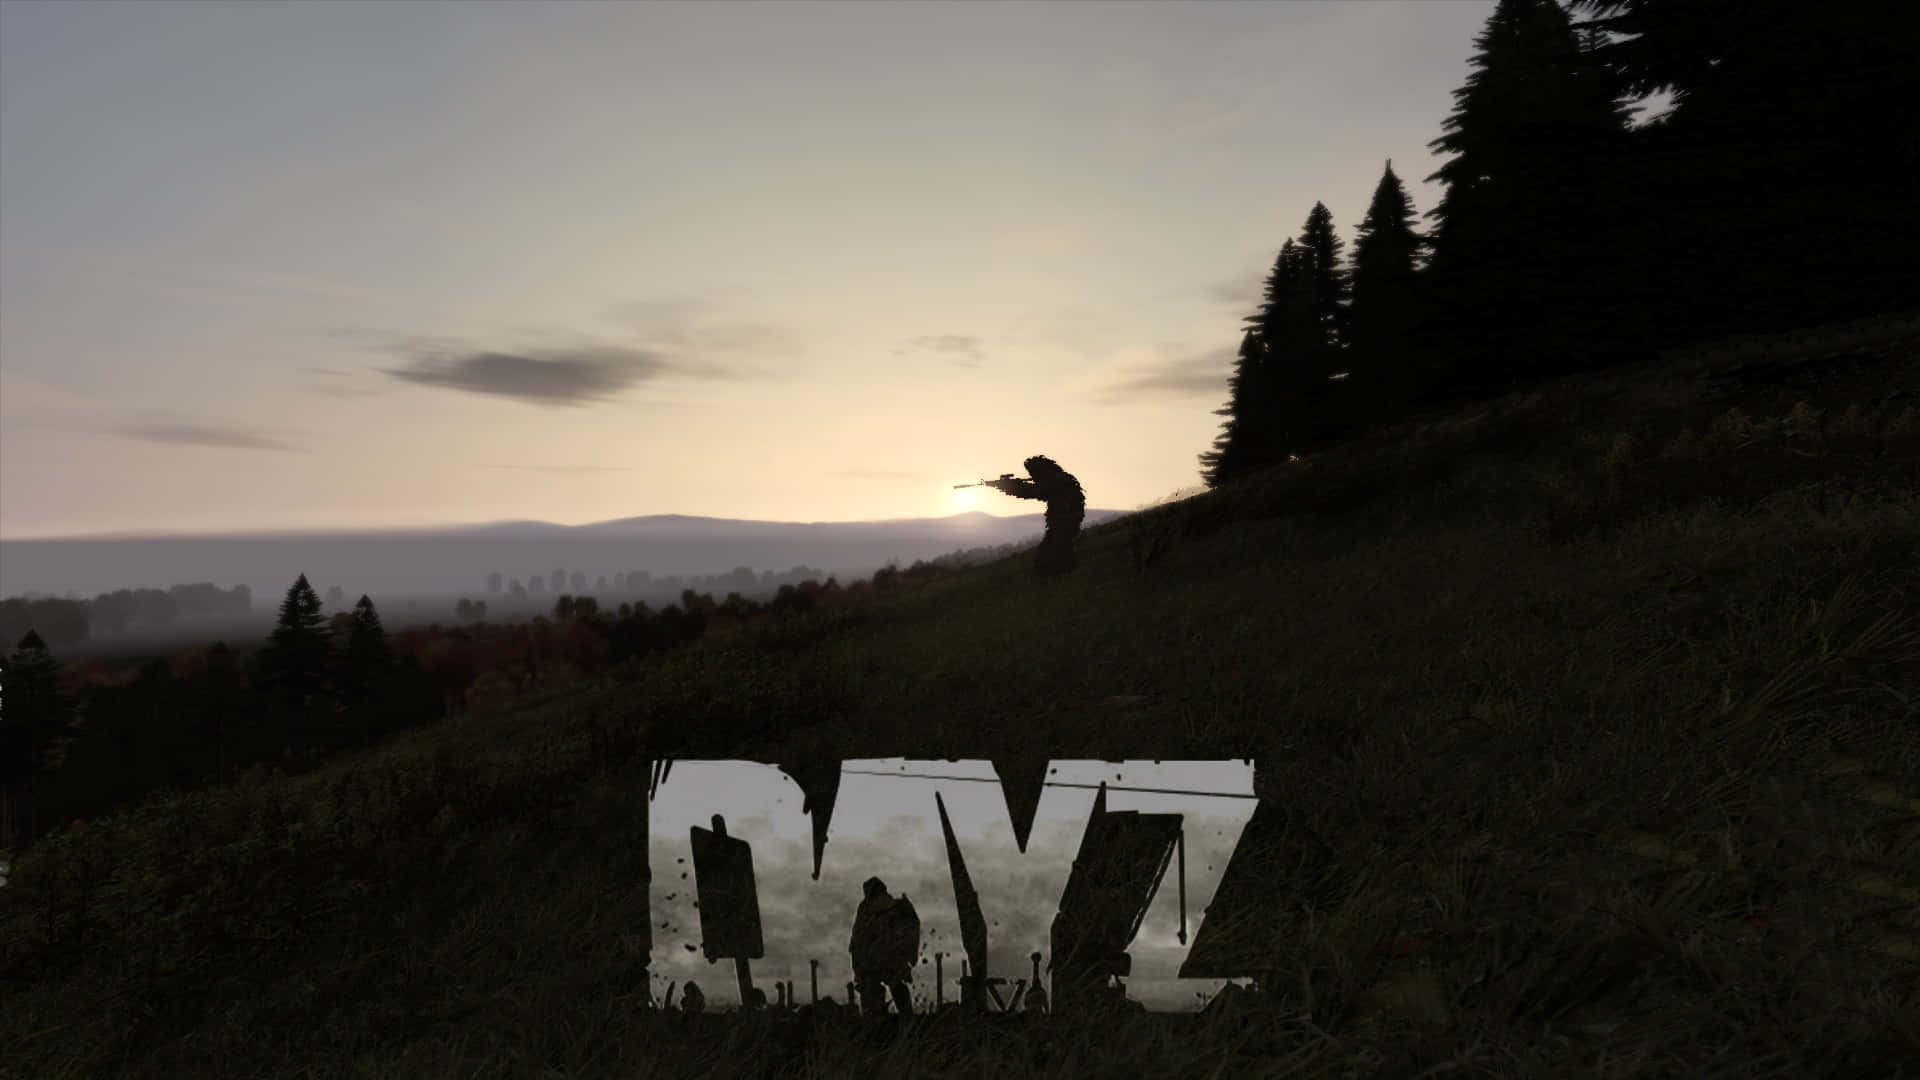 1080p Dayz Background Silhouette Of A Sniper